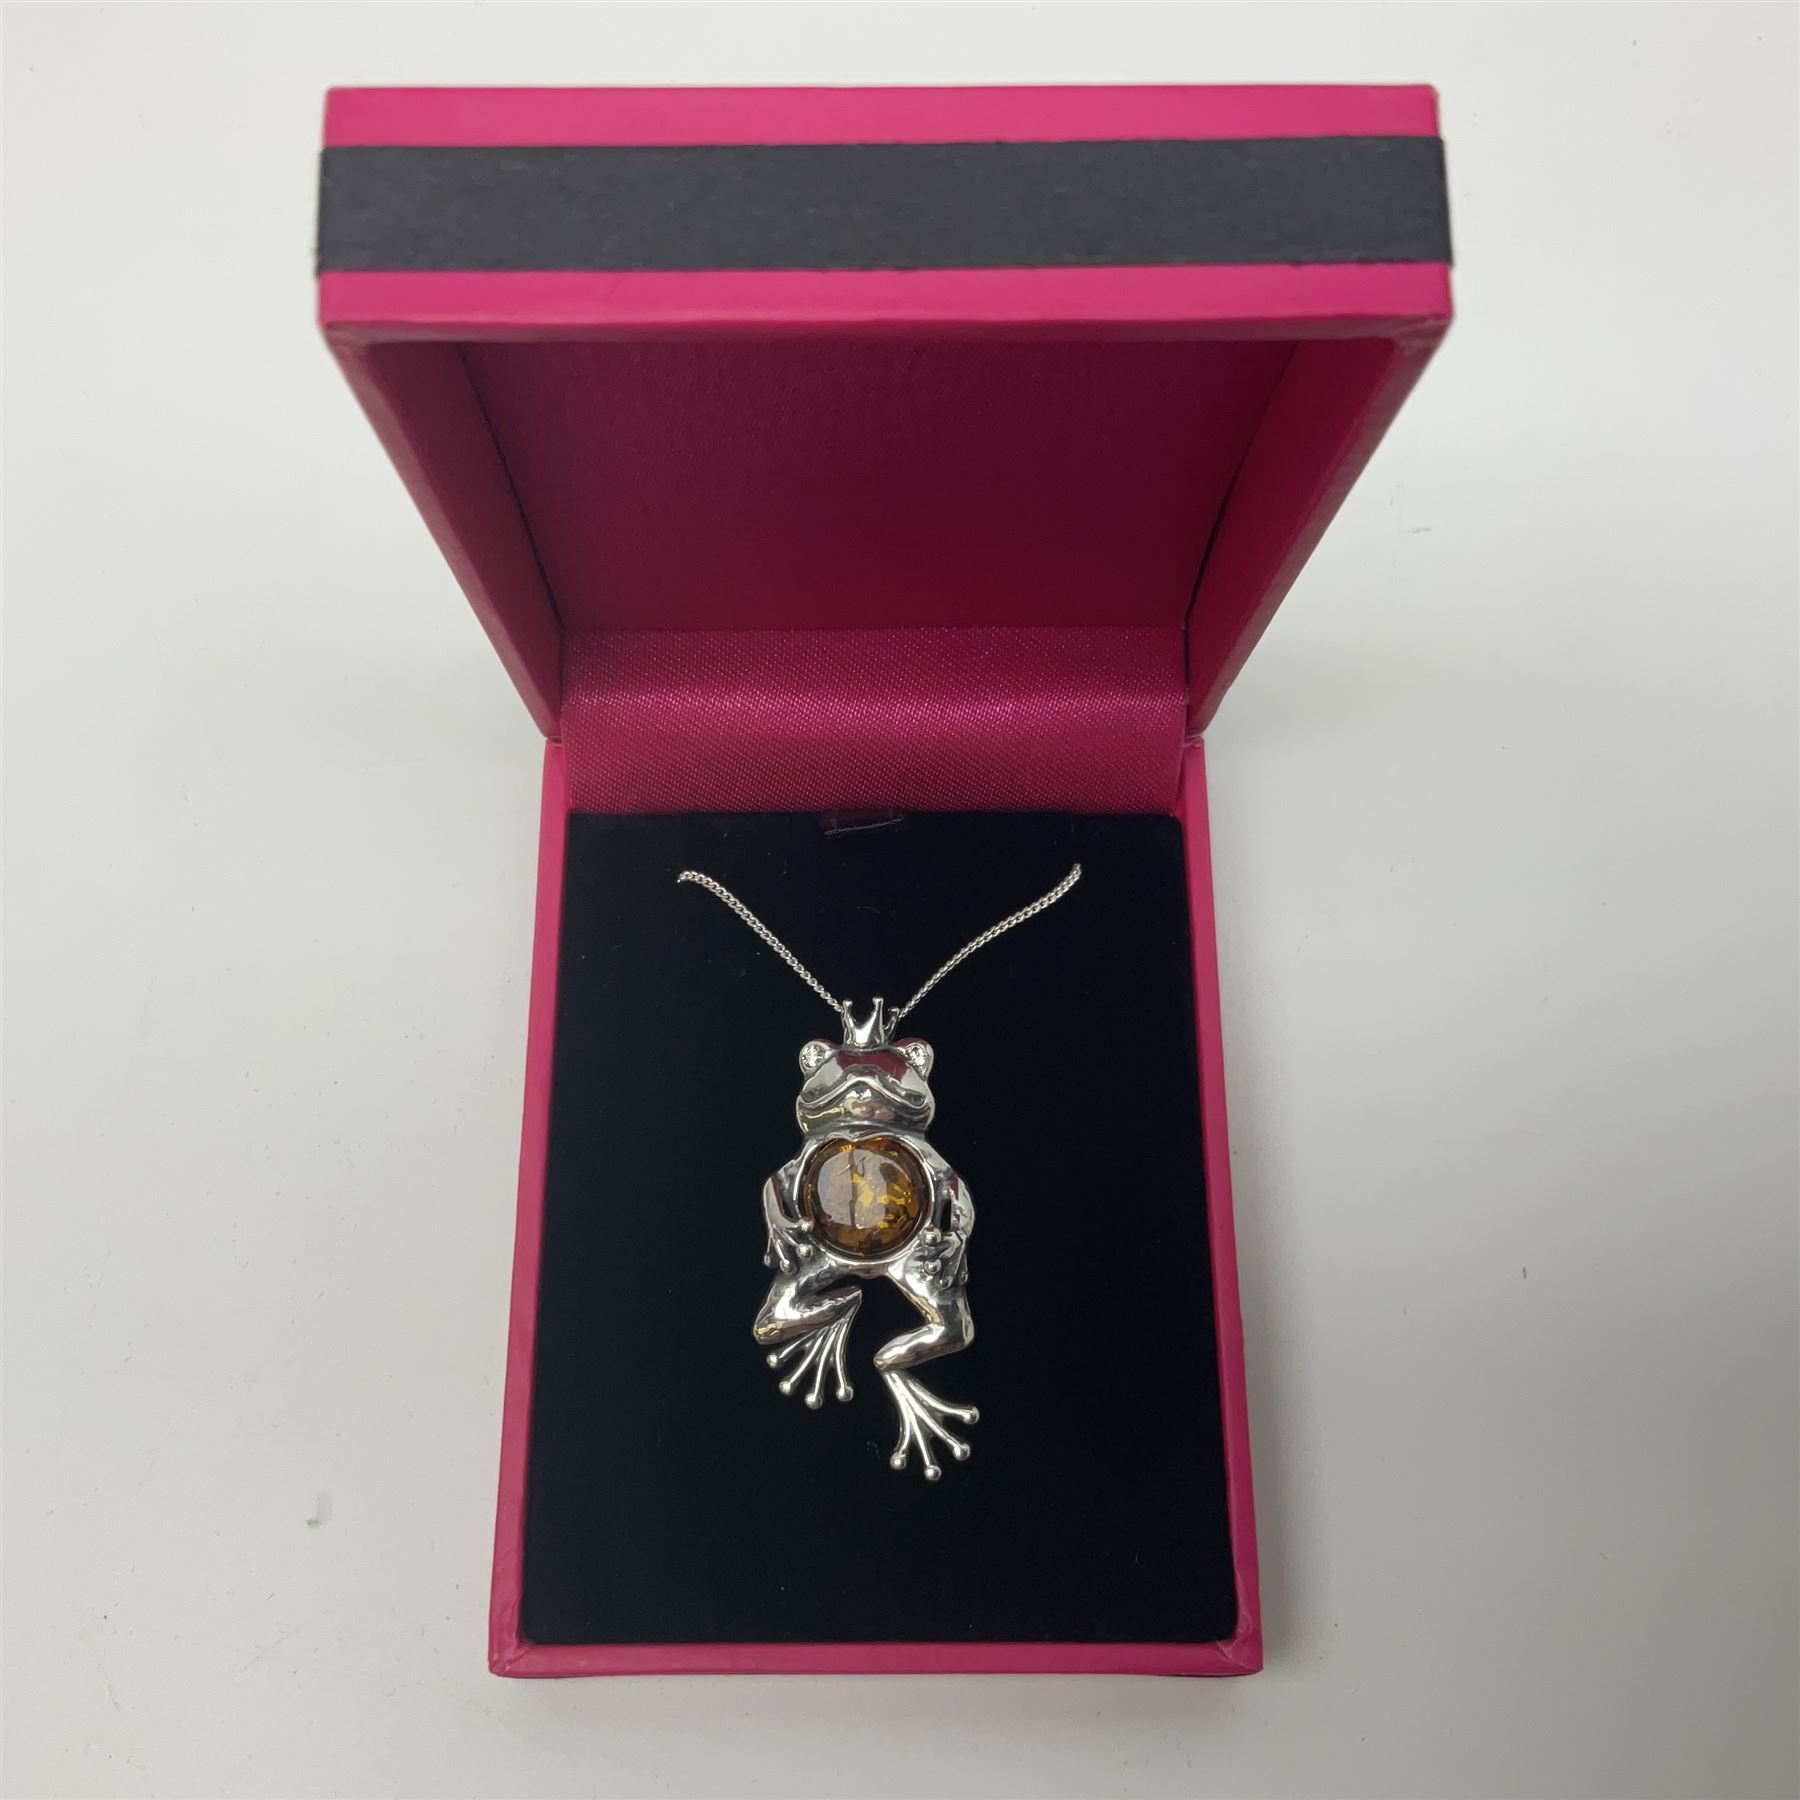 Silver Baltic amber frog prince pendant necklace - Image 5 of 5